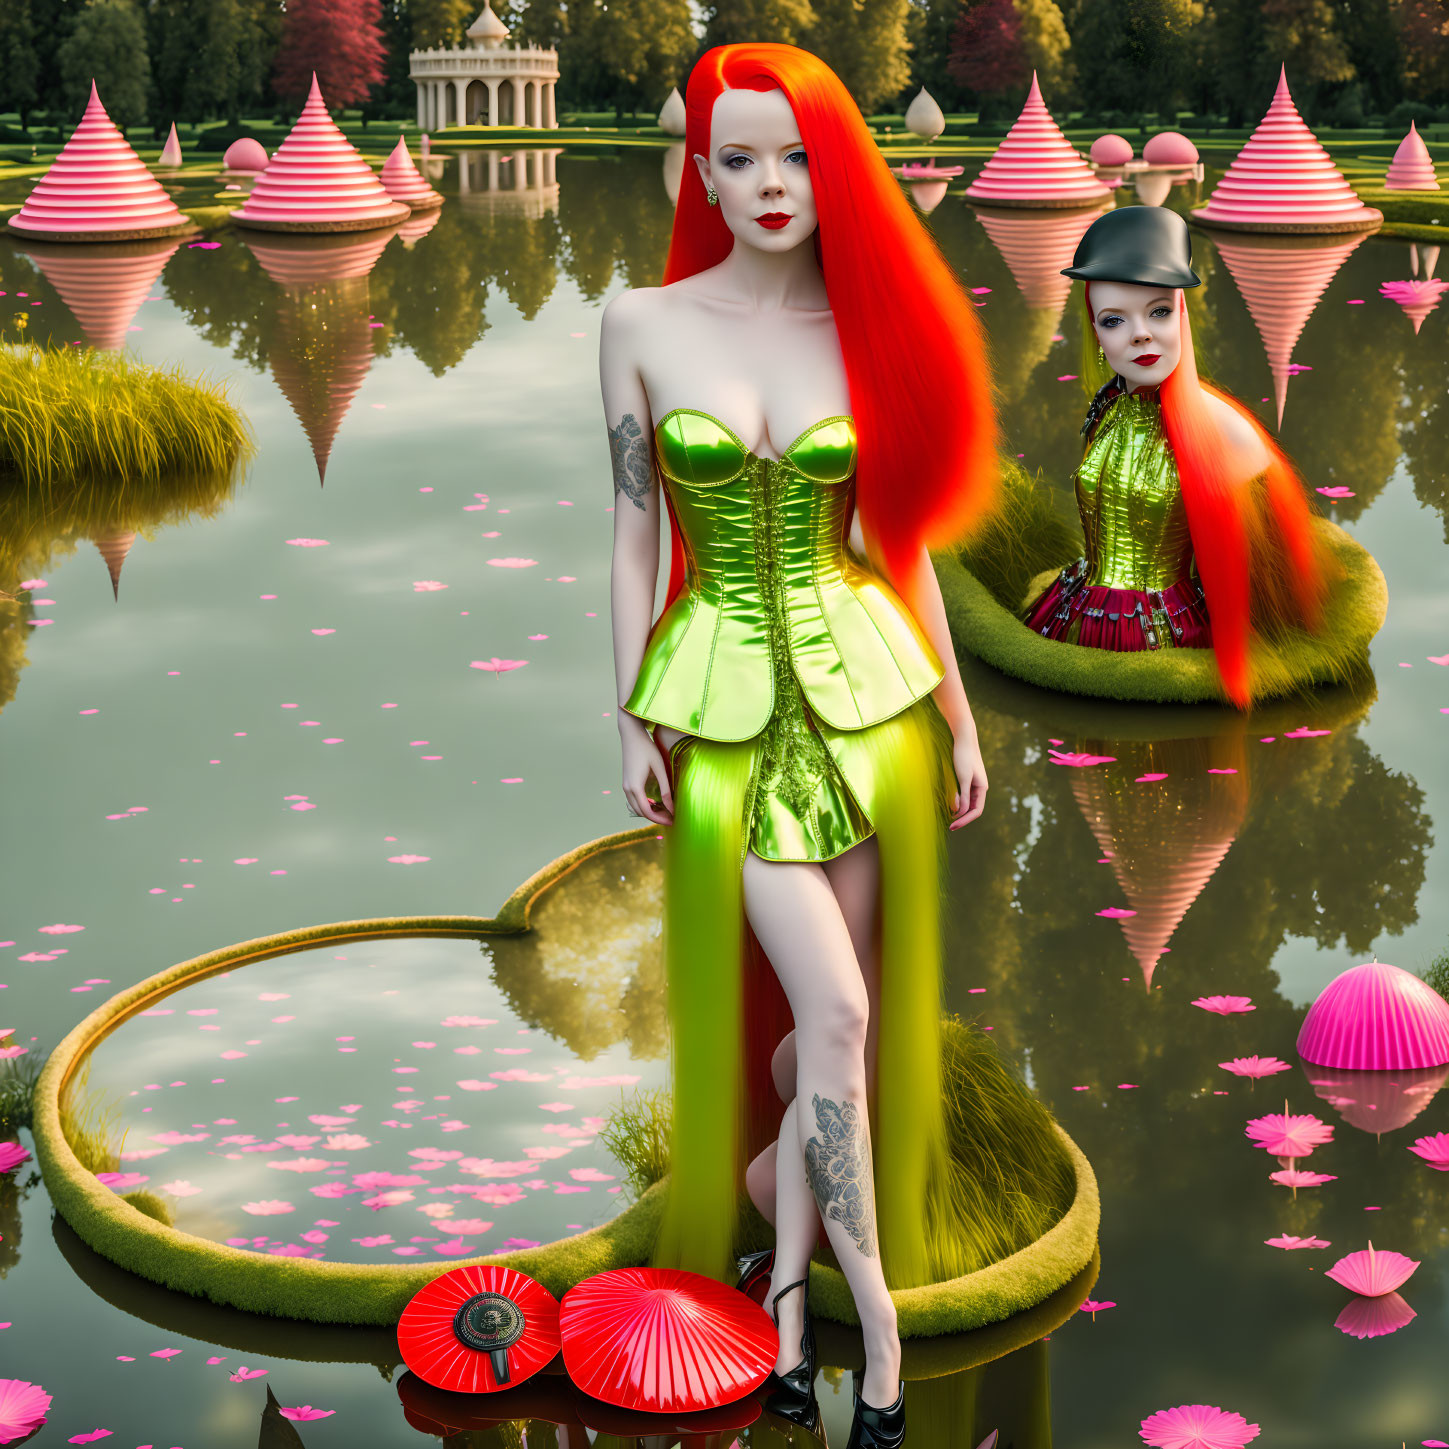 Stylized female figures with red hair and green dresses in surreal pond